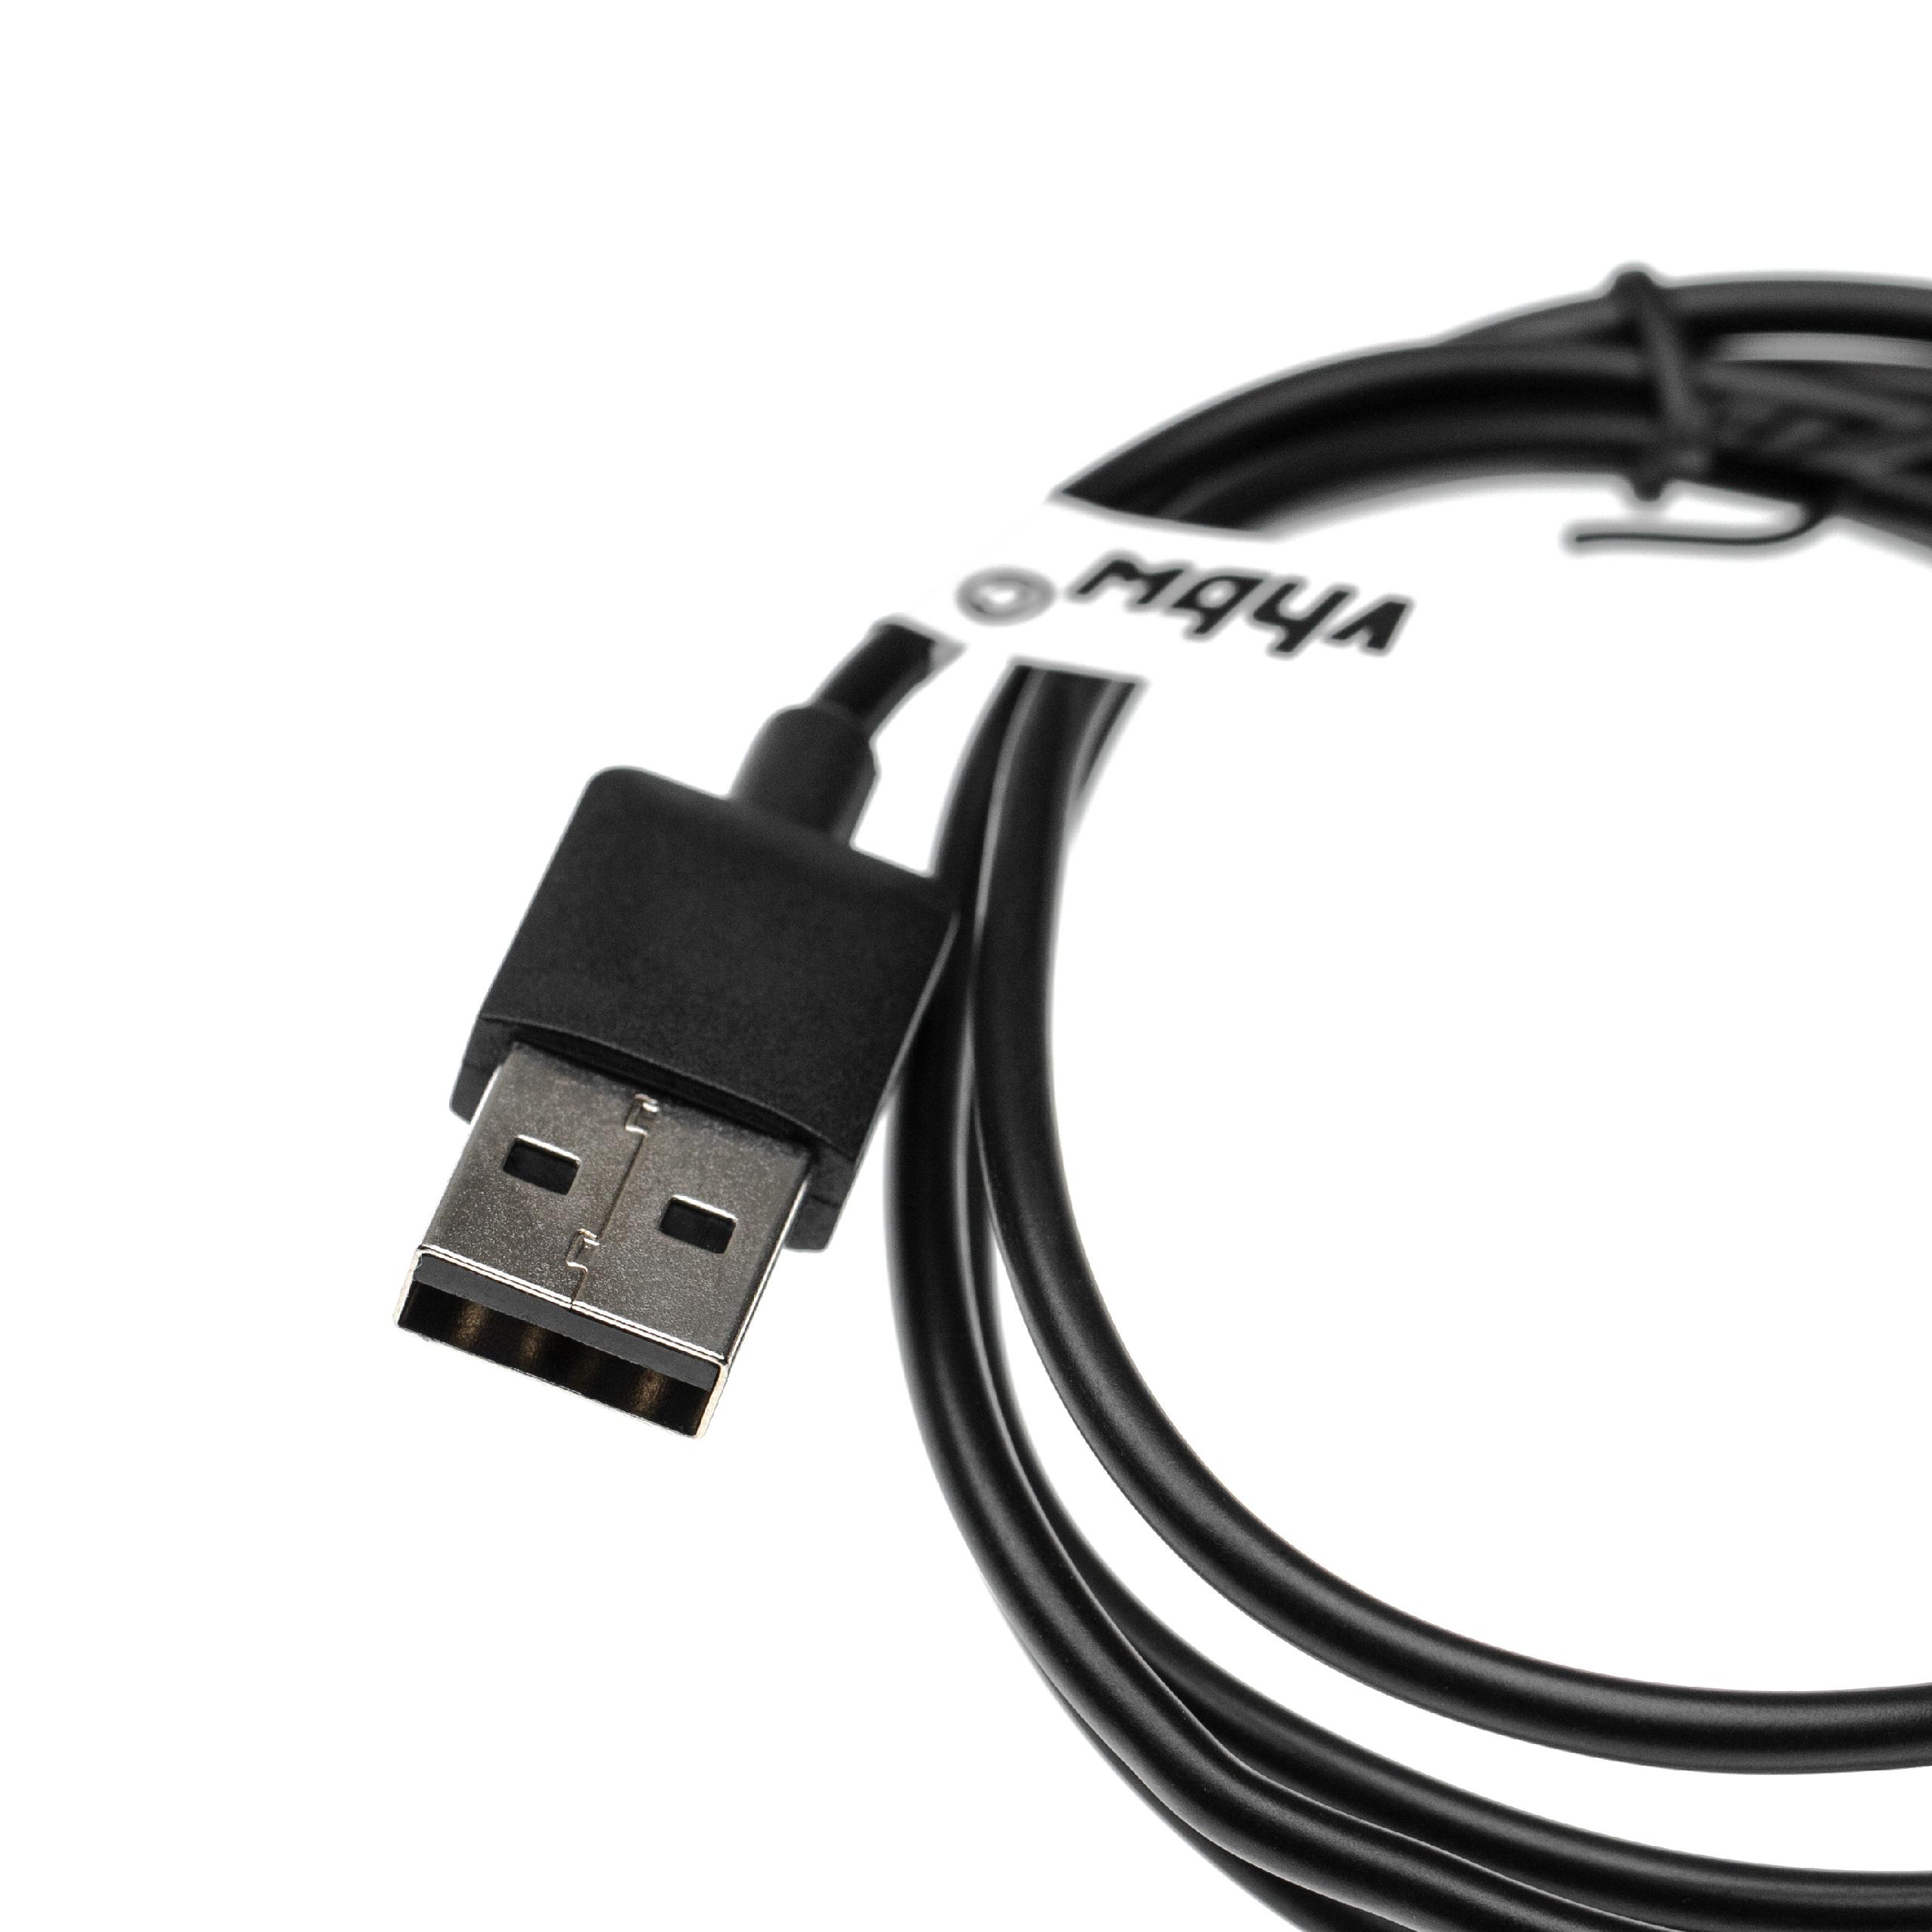 Charging Cable suitable for 3 Garmin Vivoactive 3 Fitness Tracker - USB A Cable, 100cm, black